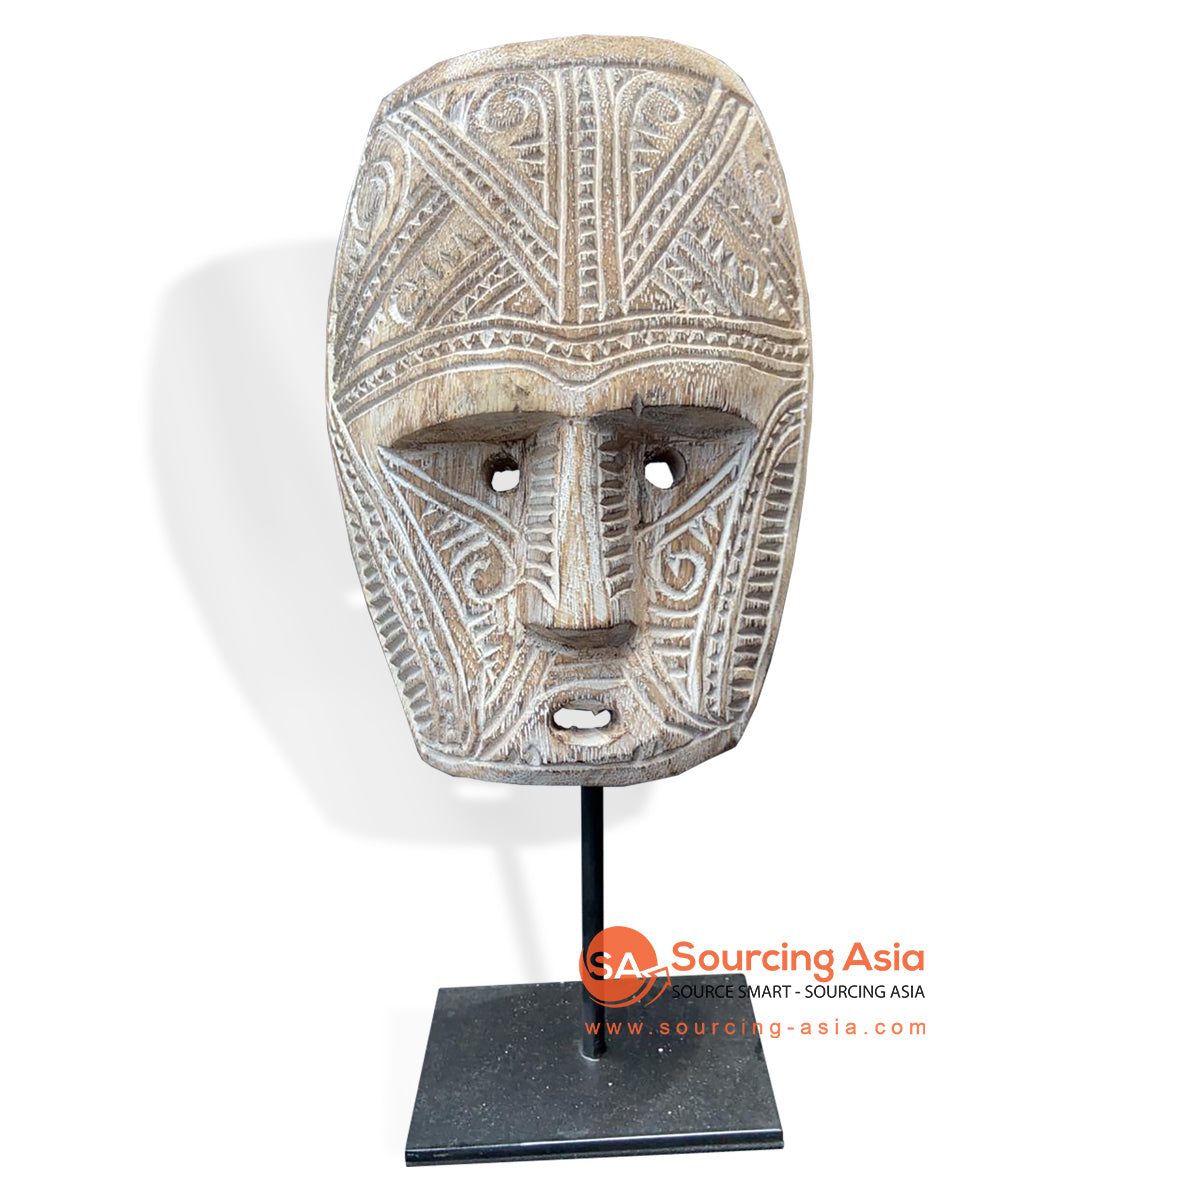 KNT039-1 NATURAL WOODEN TRIBAL MASK ON STAND DECORATION WITH WHITE LINING